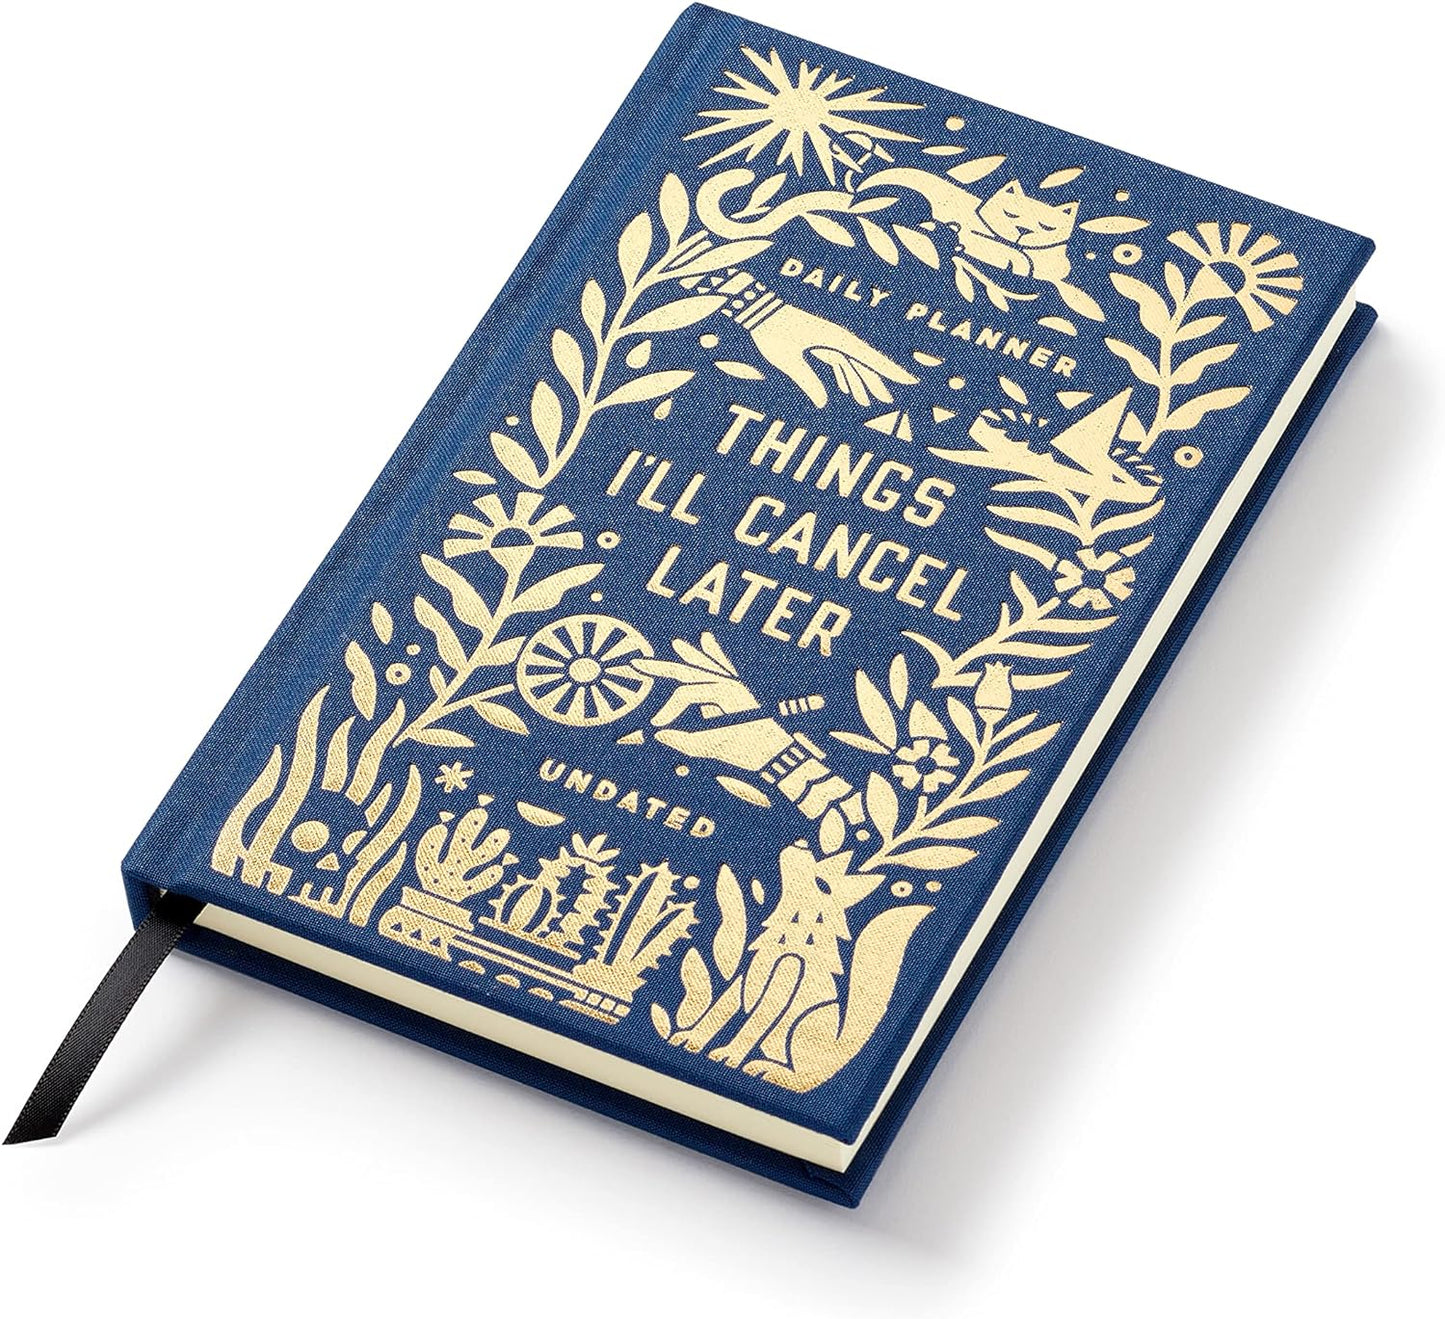 Things I'll Cancel Later - Undated Mini Planner